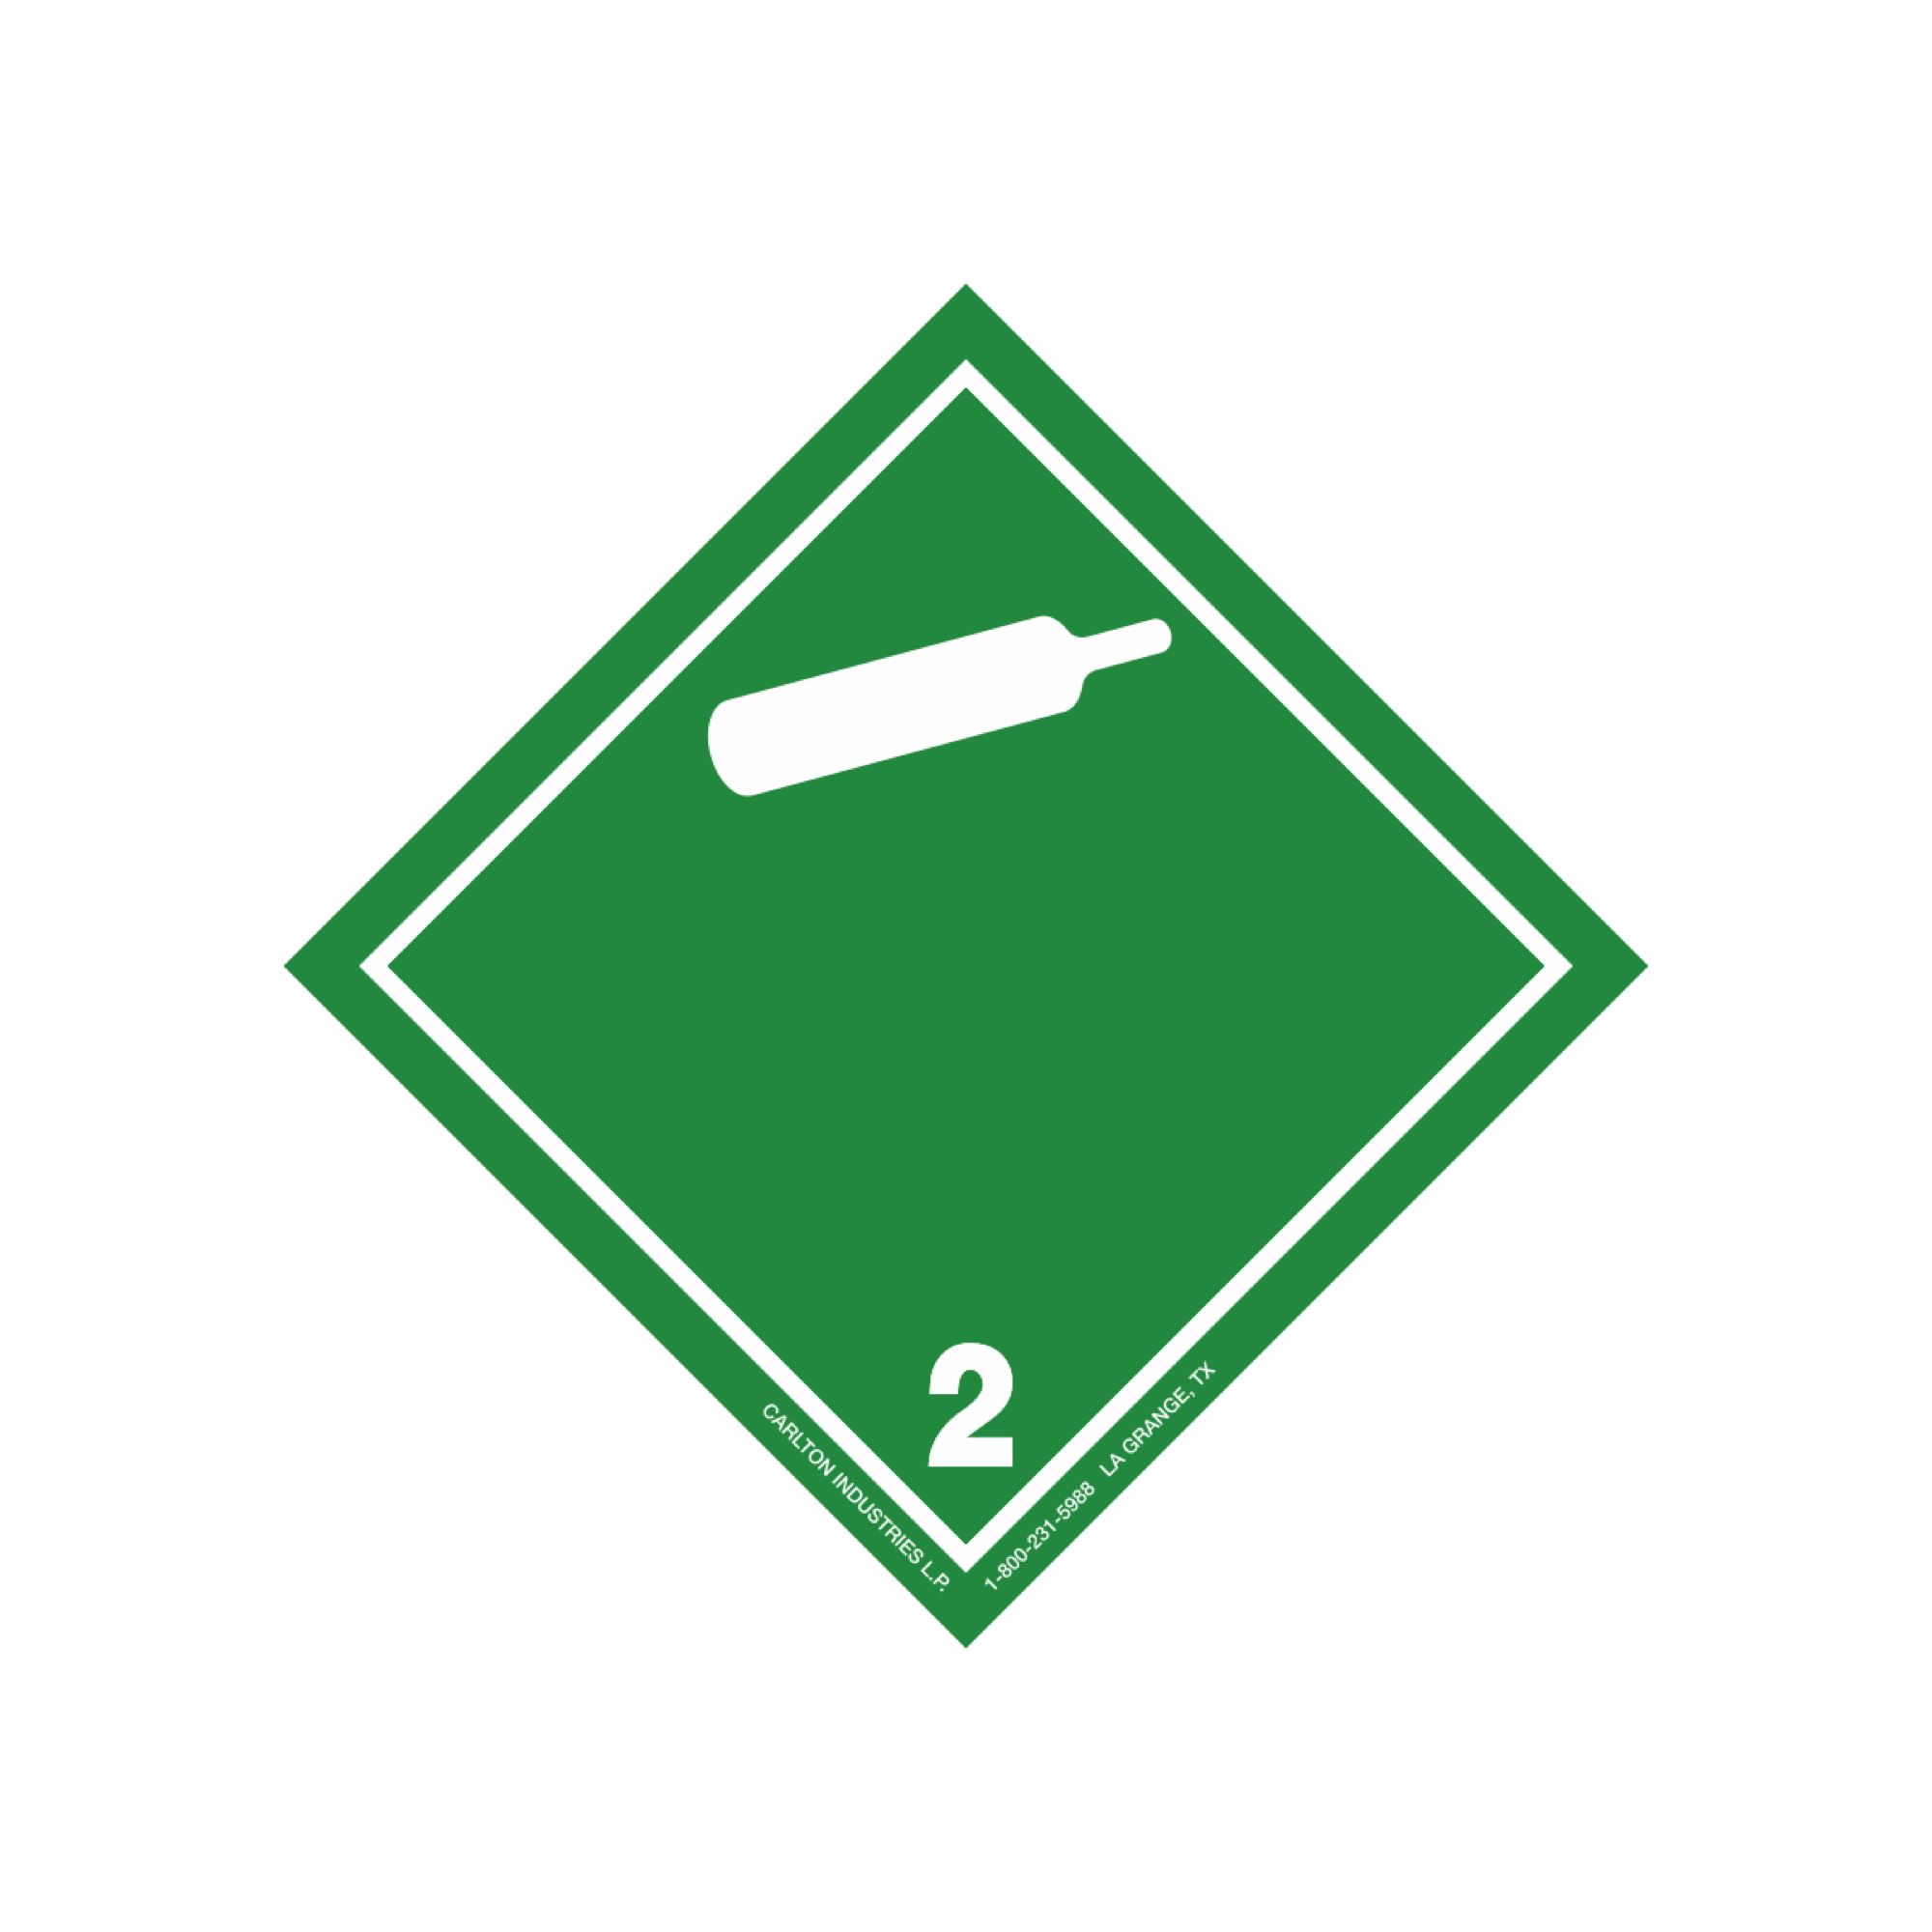 Ghs Class Non Flammable Gas Label Transport Pictogram Inch